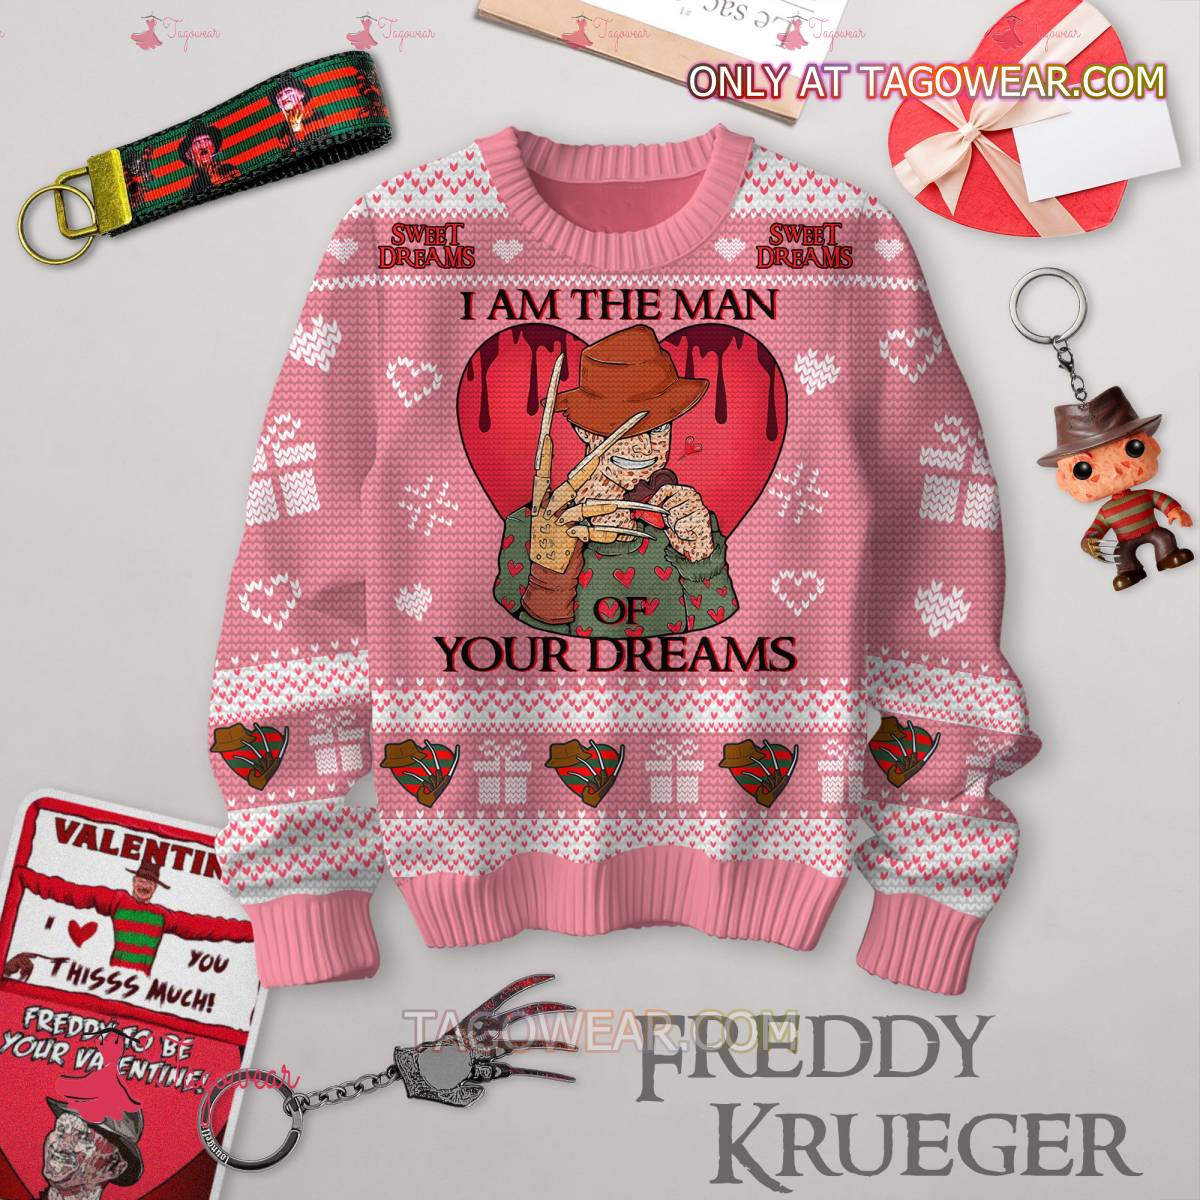 Freddy Krueger I Am The Man Of Your Dreams Valentine Sweater